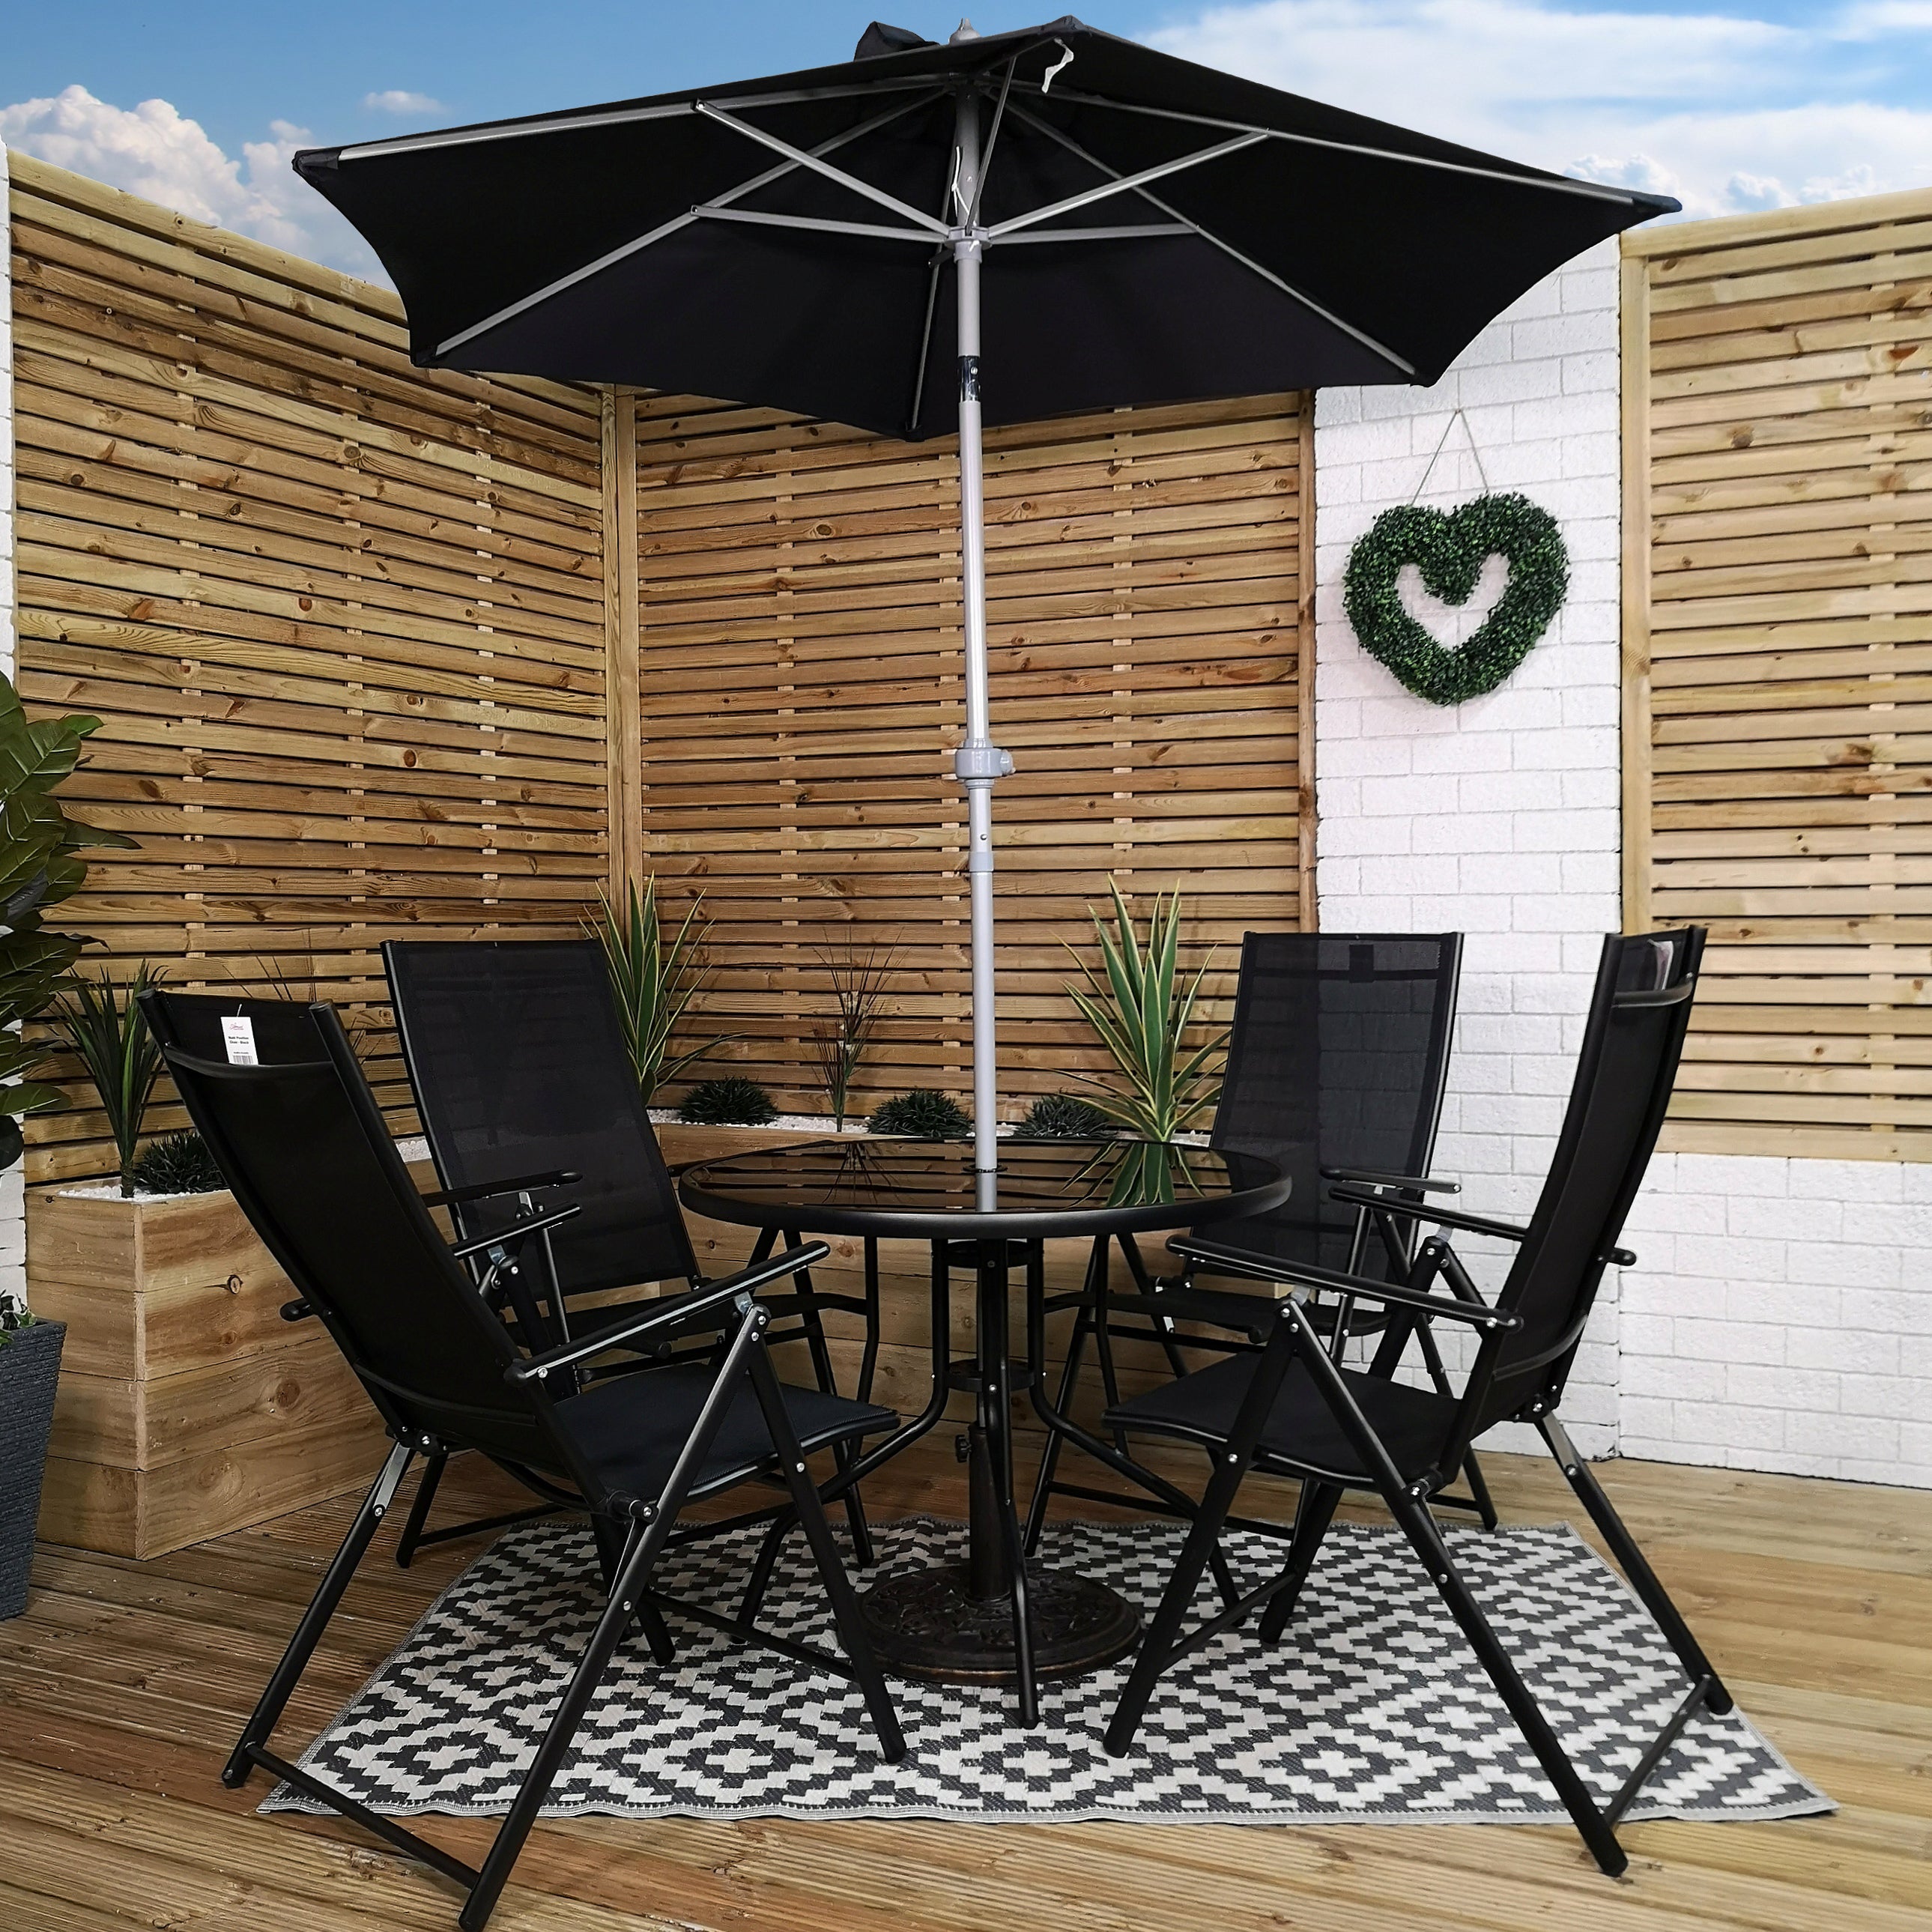 Outdoor 4 Person Round Glass Top Garden Patio Dining Table Chairs Black Parasol and Base Set